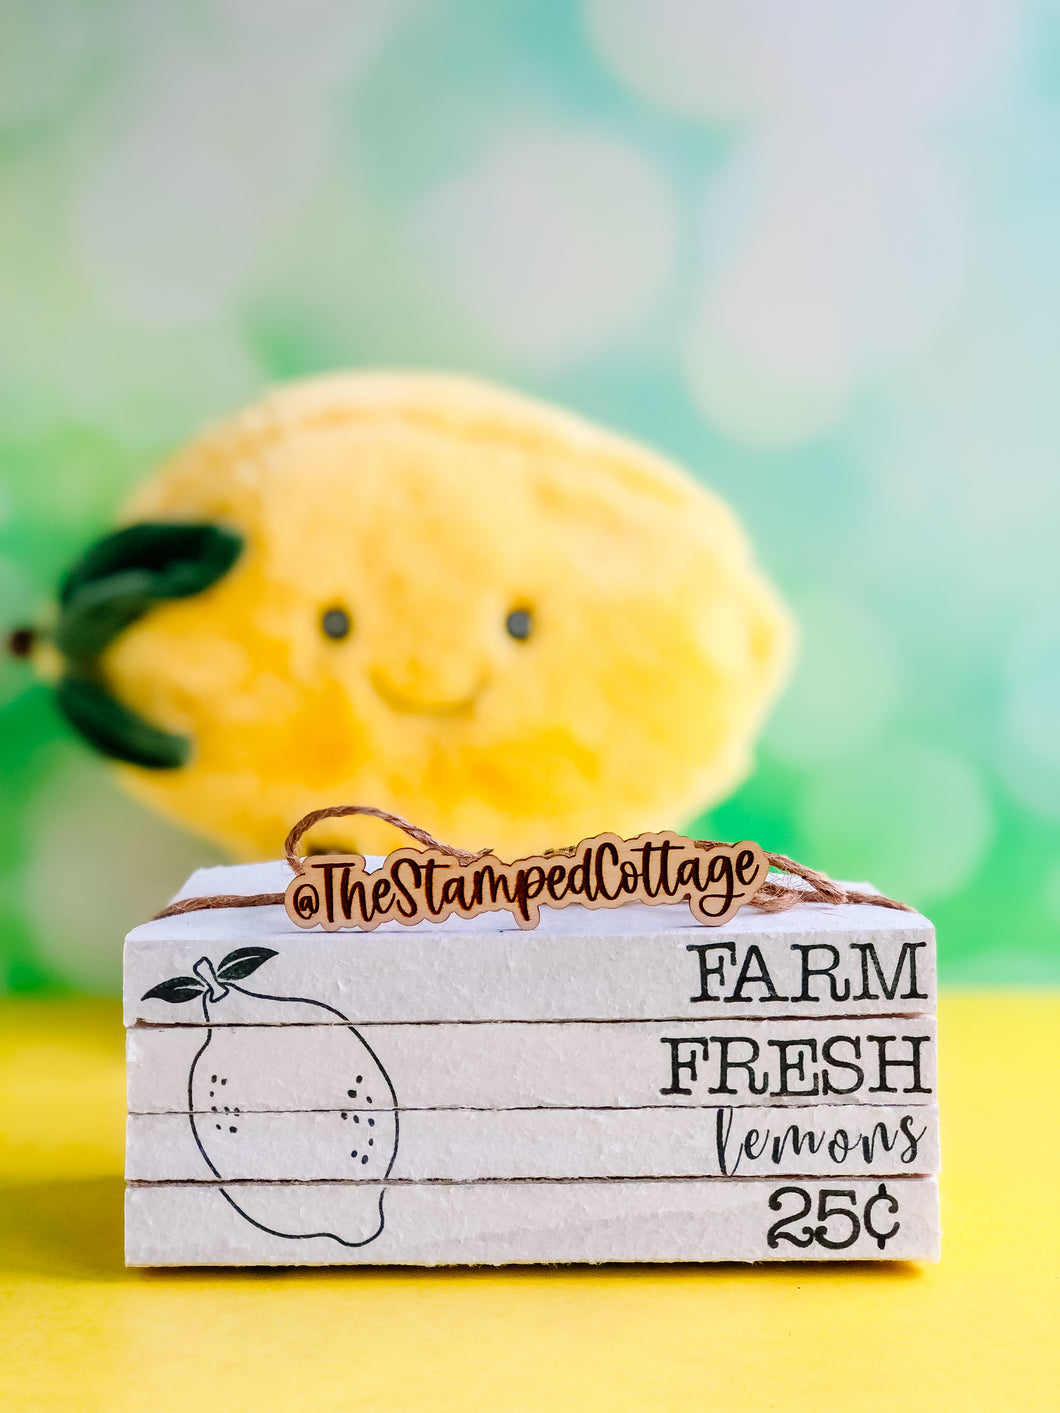 Stamped Book Stack - Farm Fresh Lemons 25 cents